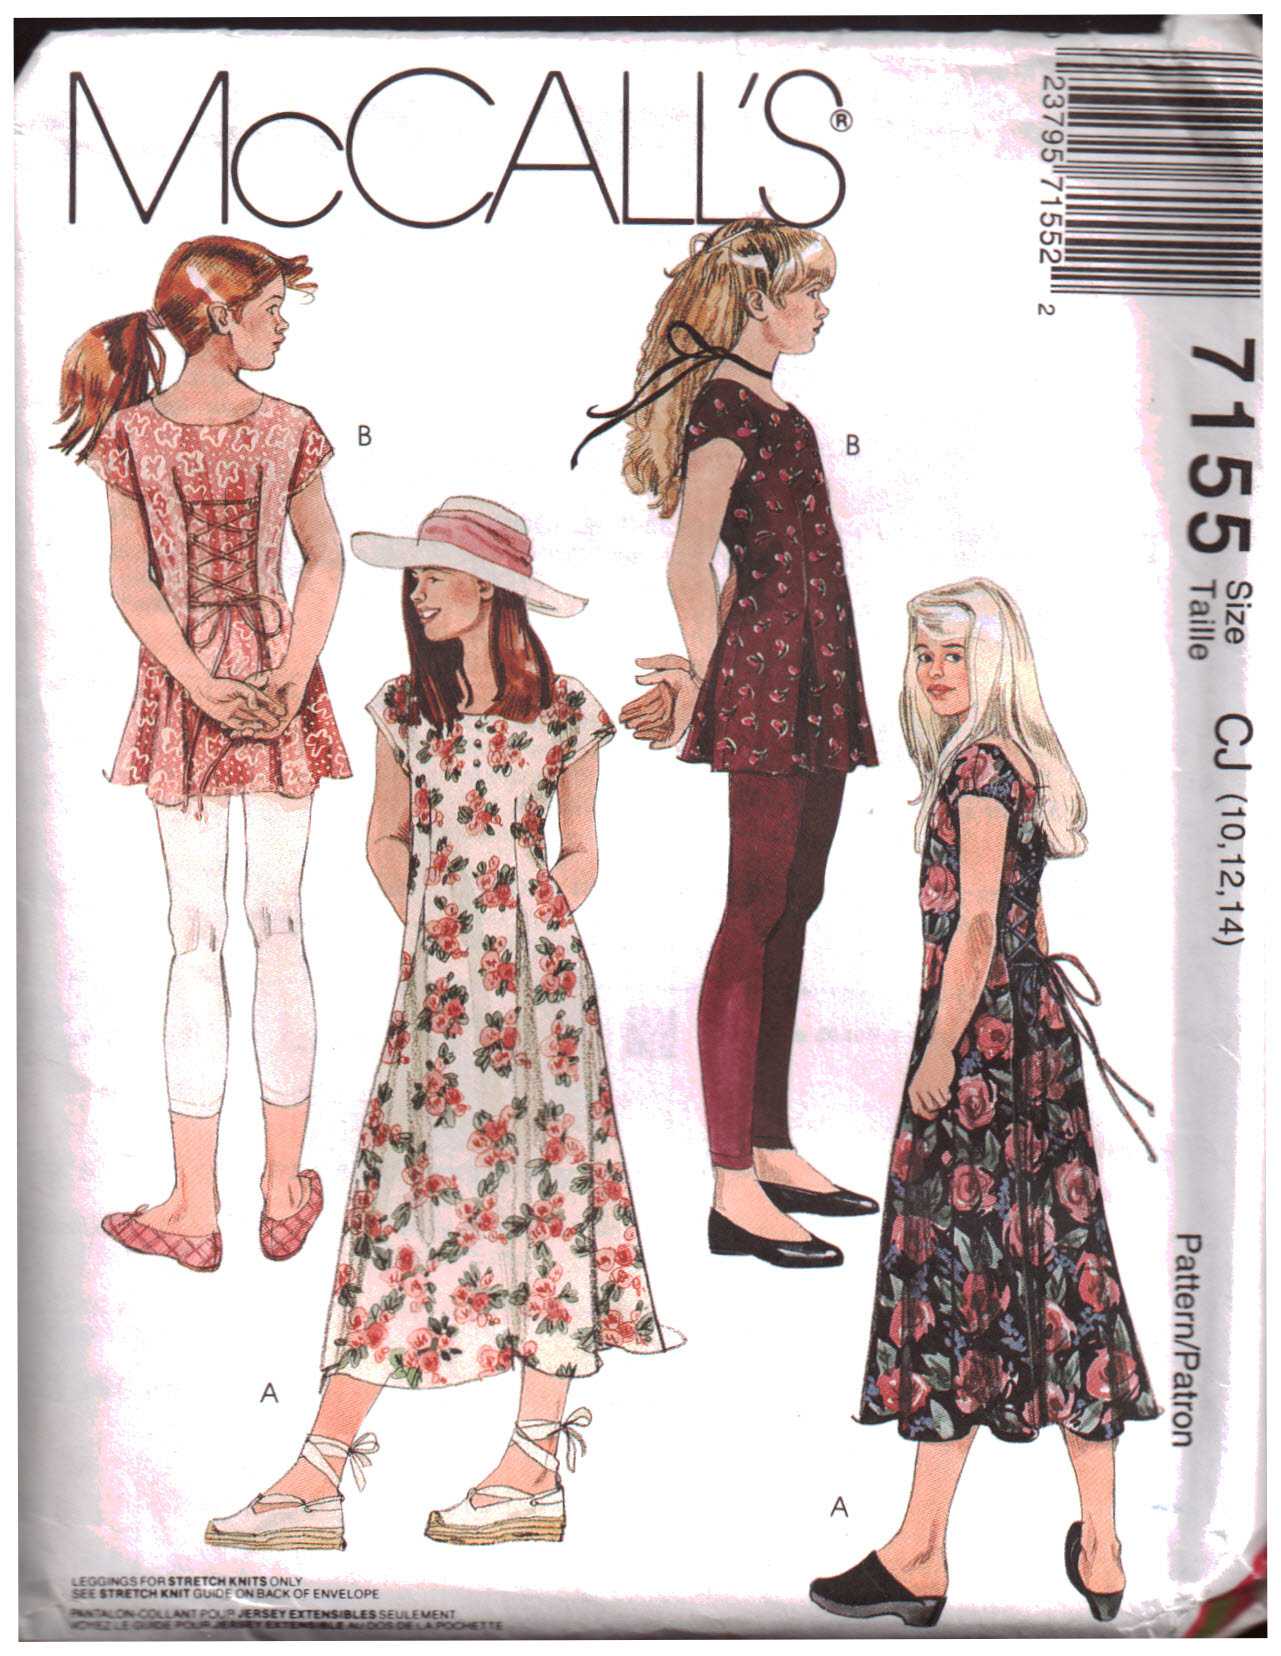 Mccall's Fashion Accessories 8259 Backpack & Bags Sewing 